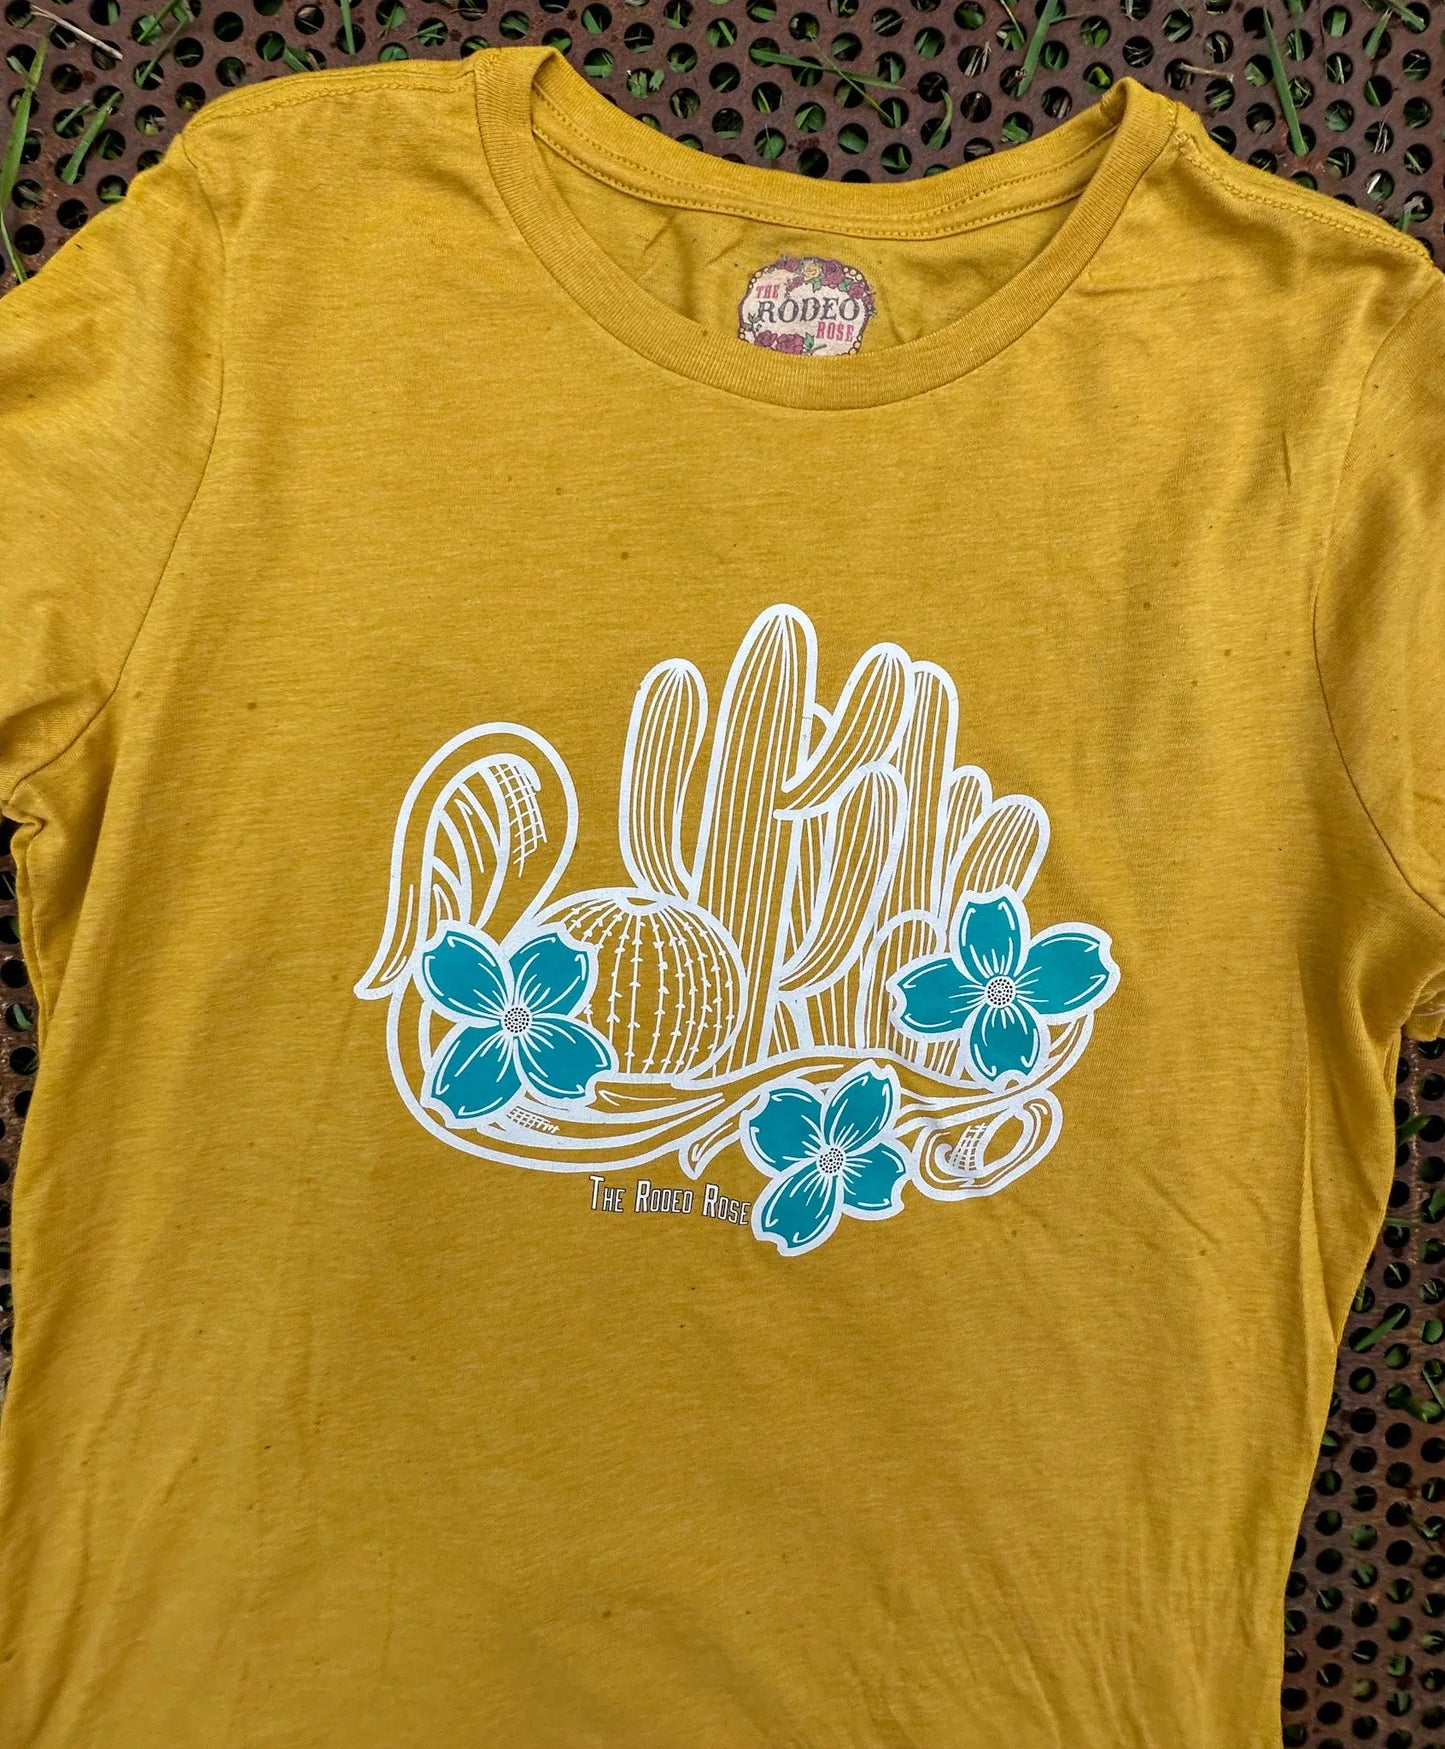 Cactus floral tshirt in mustard The Rodeo Rose